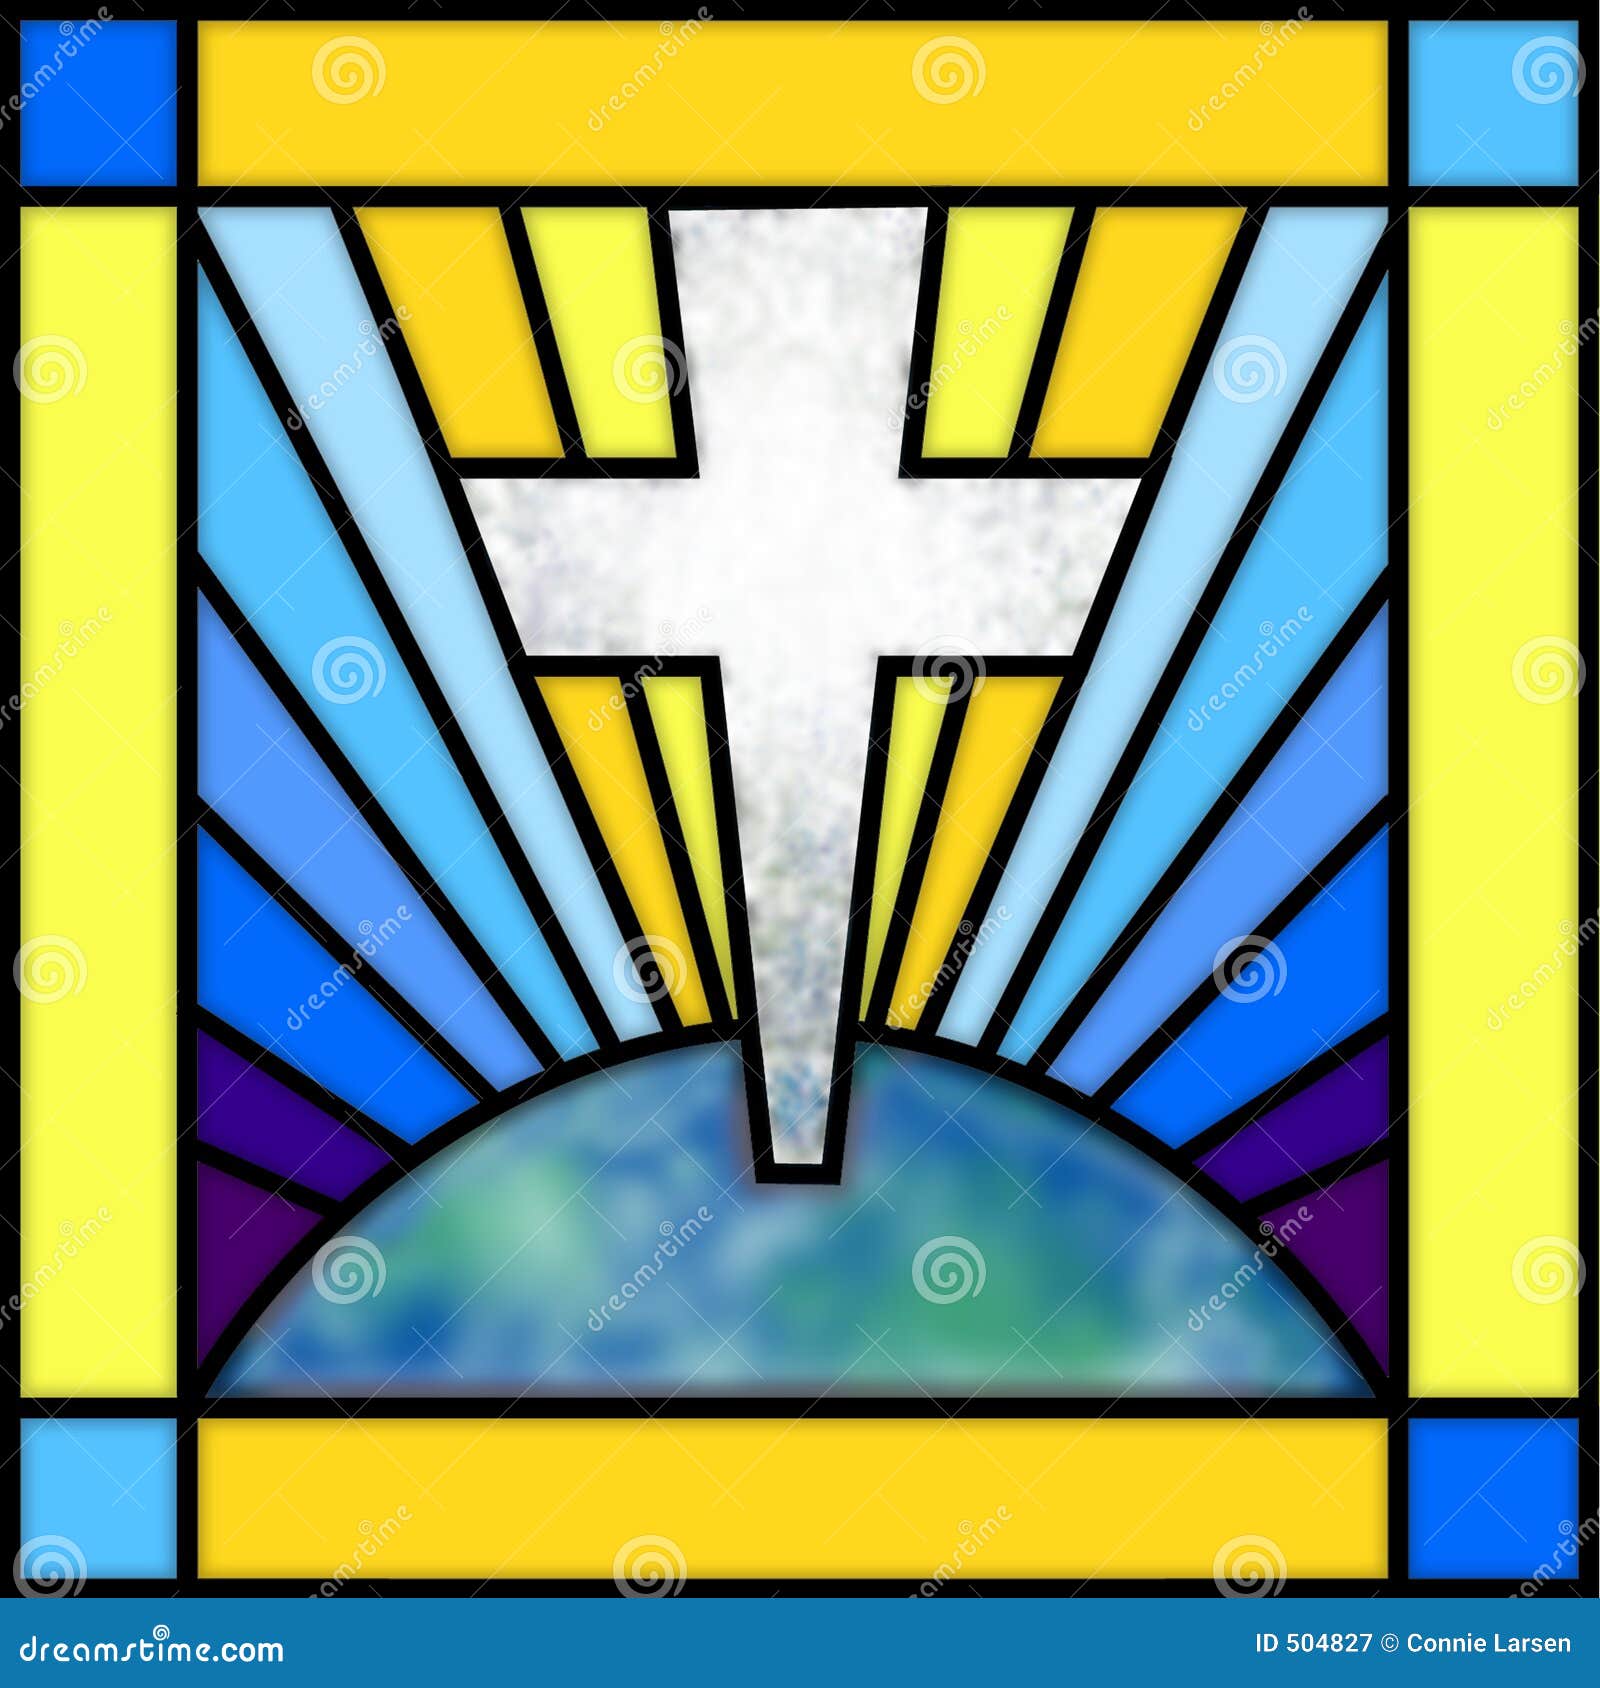 free clipart stained glass window - photo #24